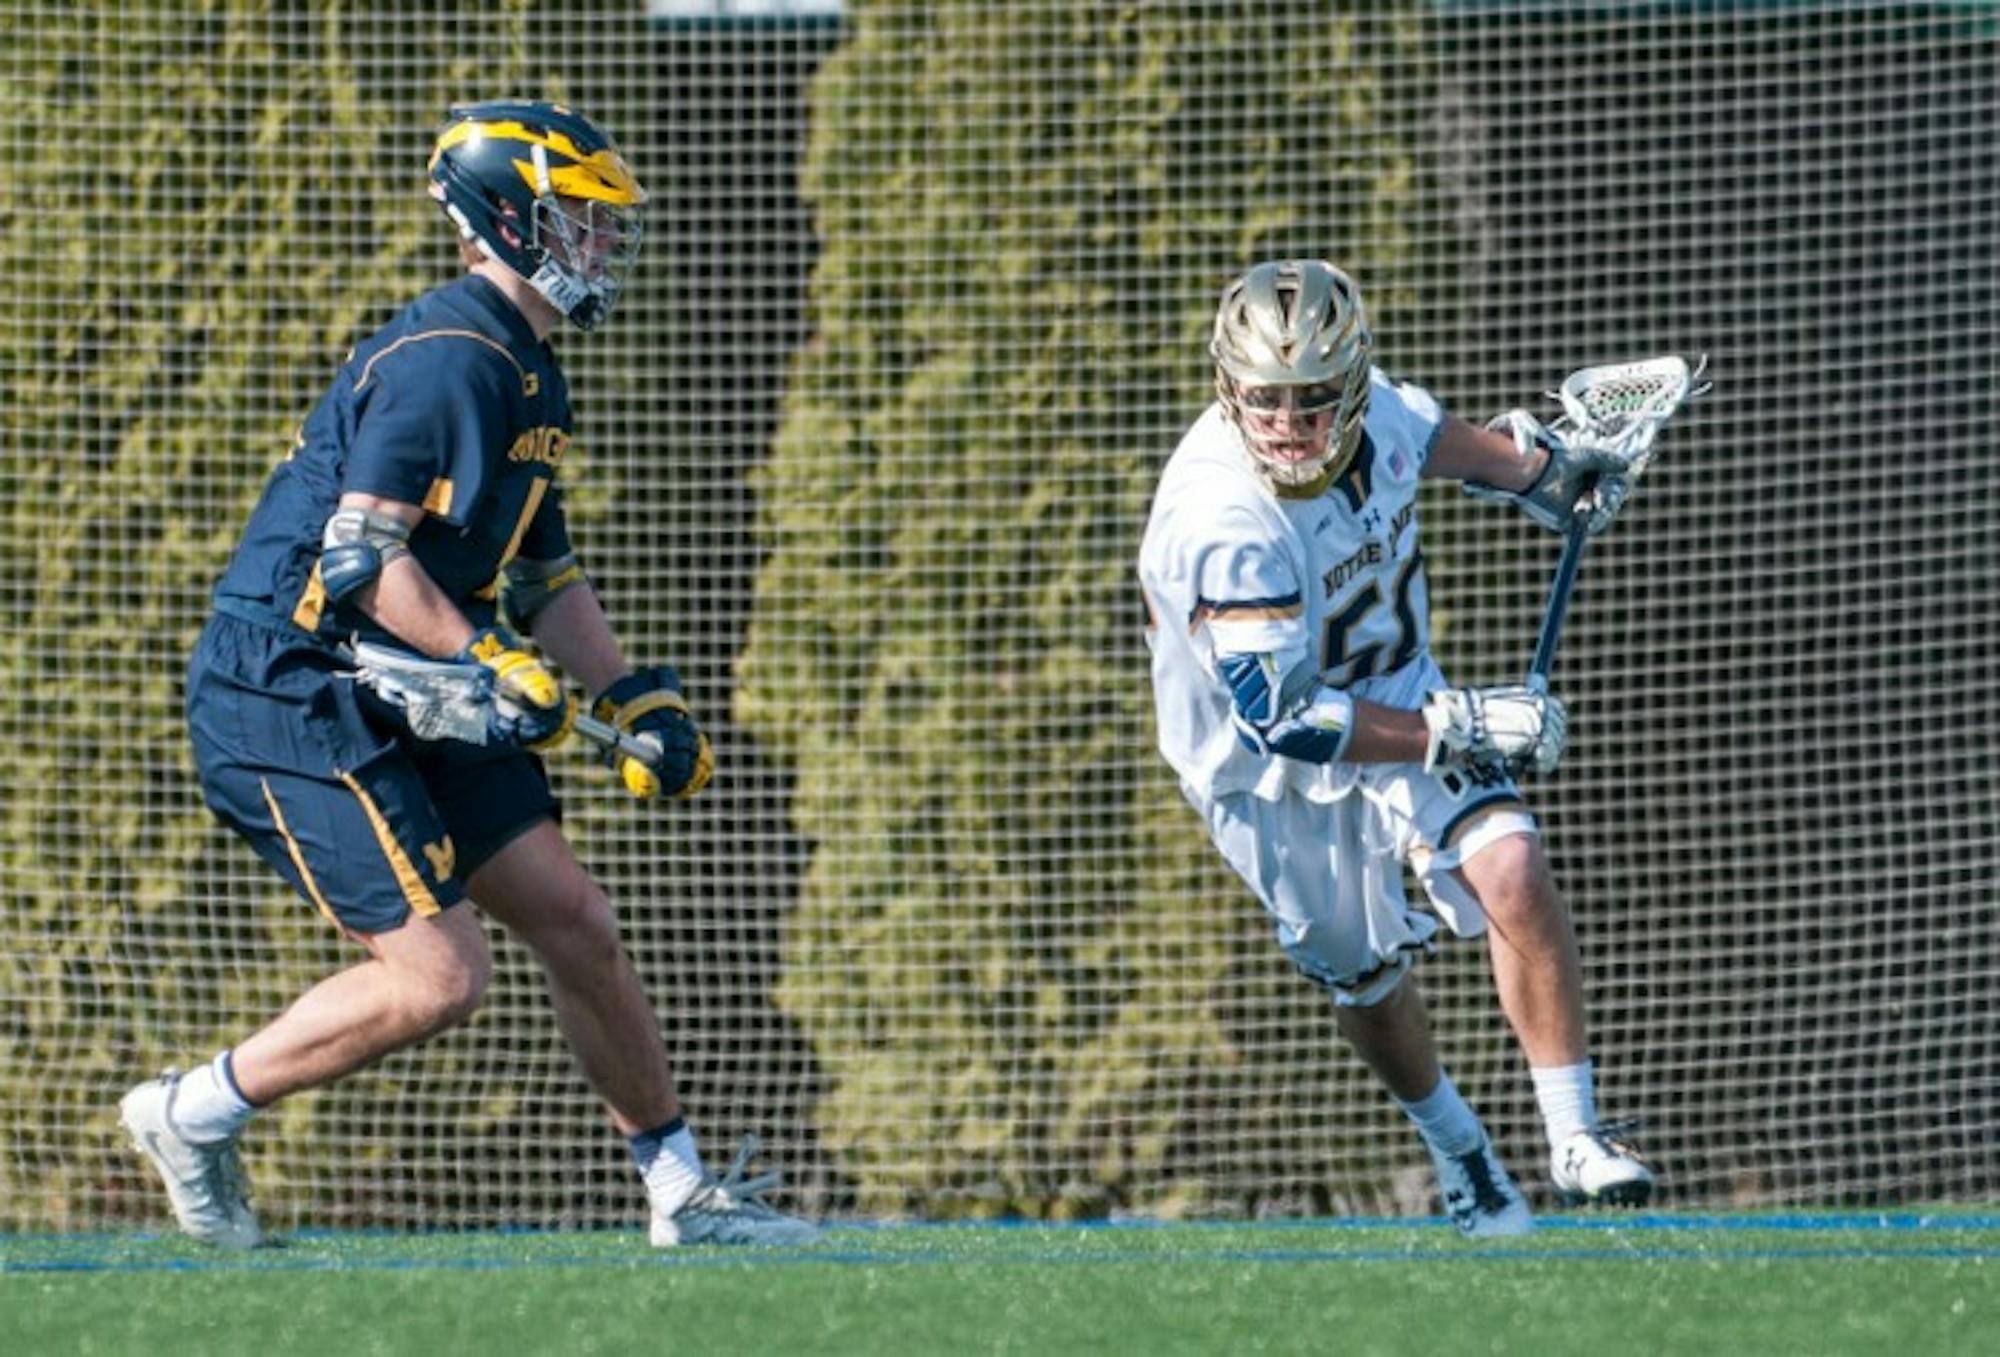 Irish sophomore attack Ryder Garnsey charges the goal during Notre Dame’s 16-5 victory over Michigan on Feb. 26 at Arlotta Stadium.